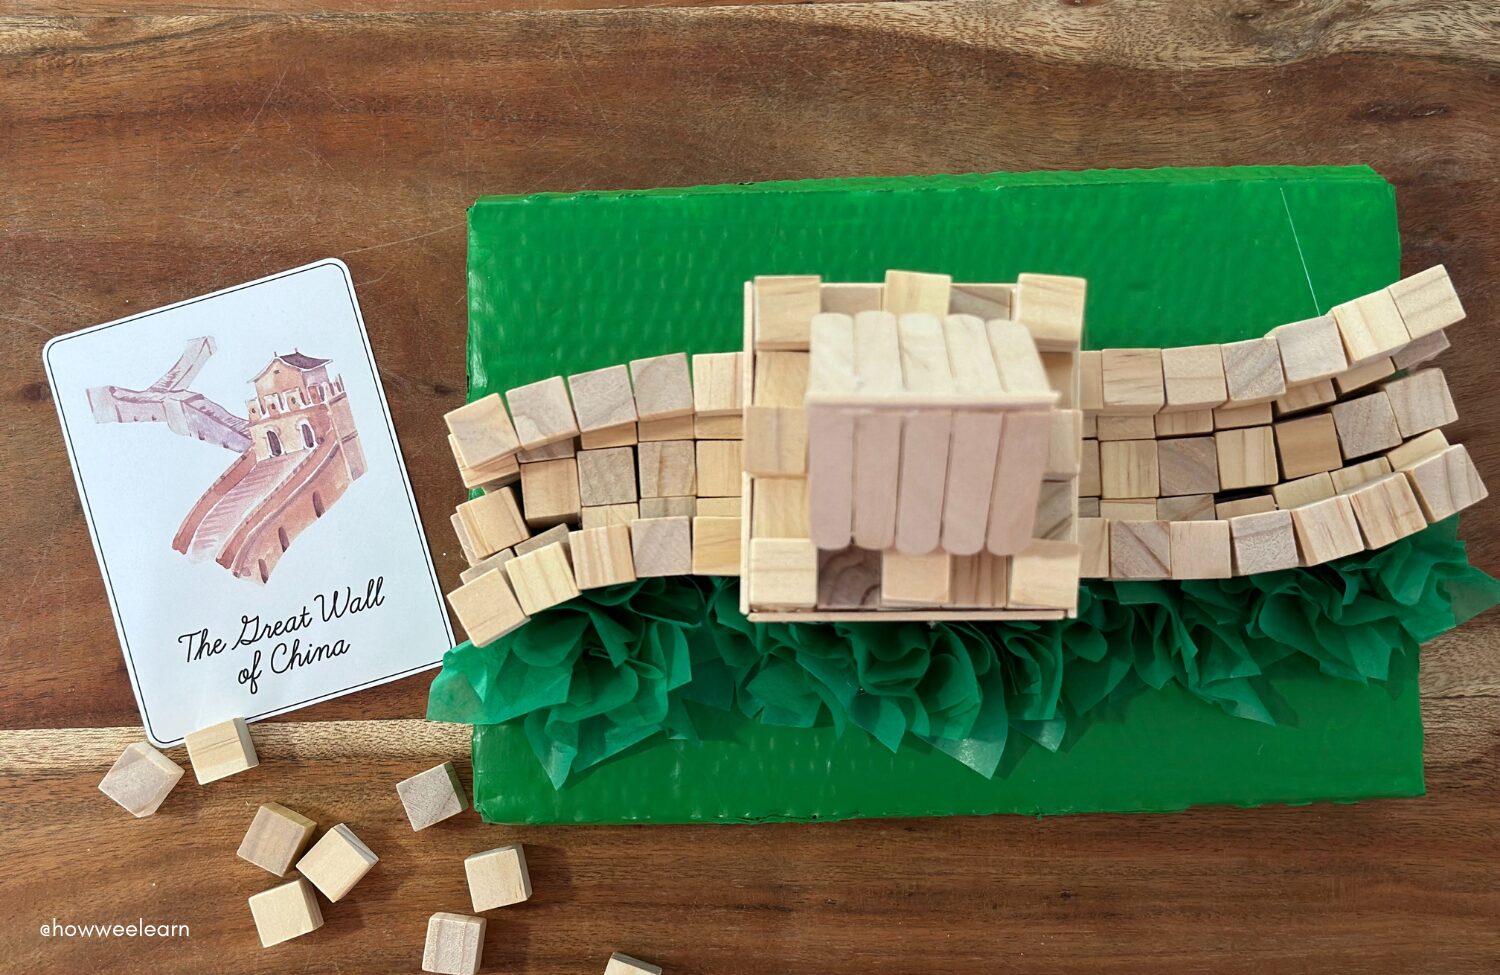 Building The Great Wall of China with small wooden blocks, aerial view